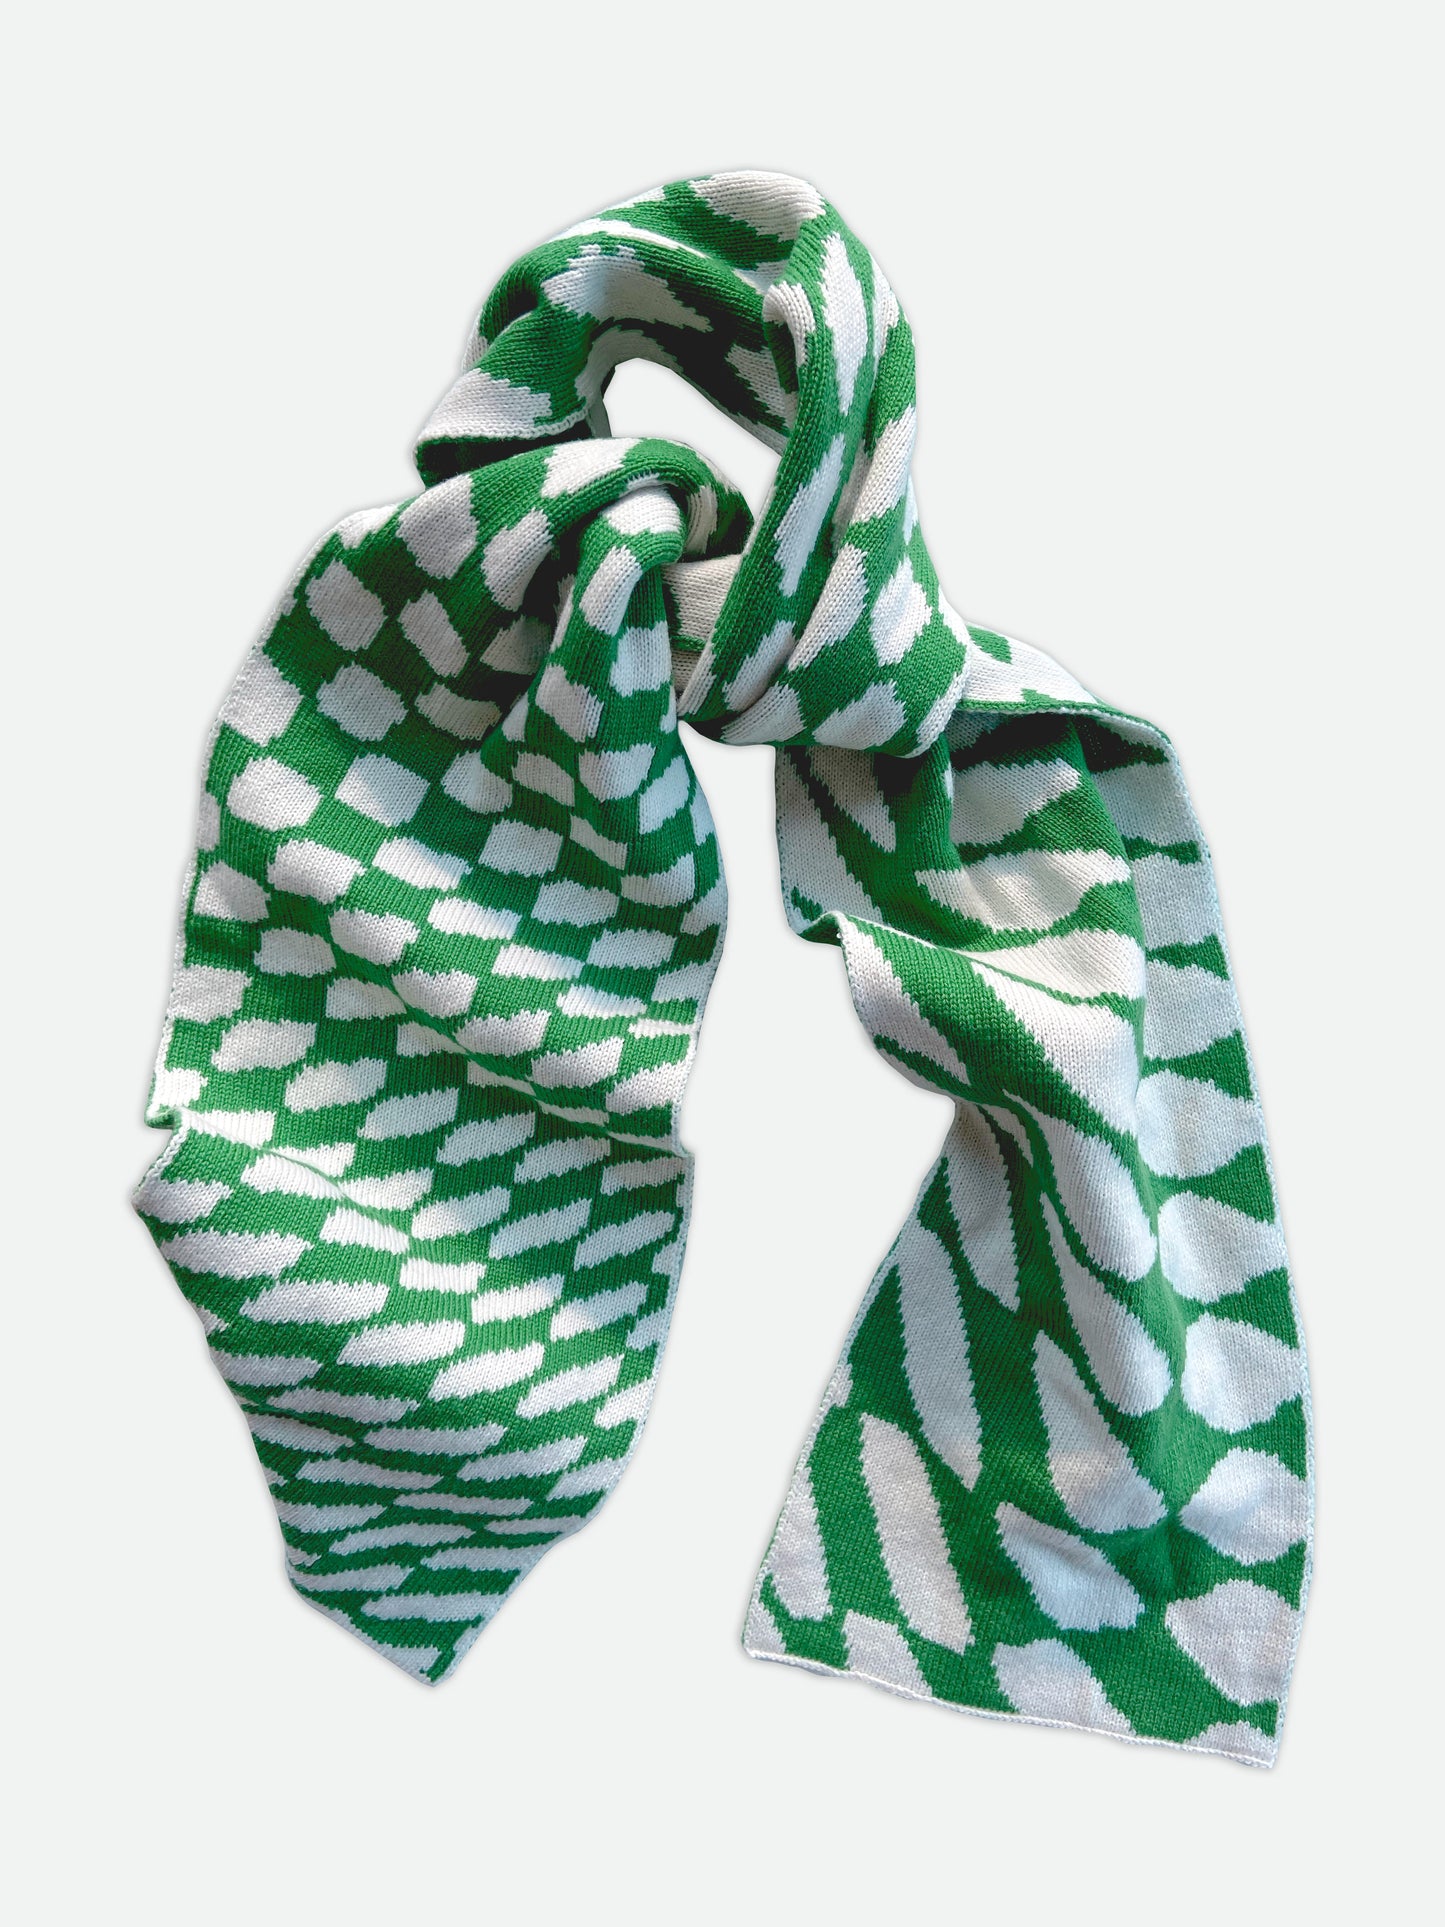 Checkered Wool and Cashmere Scarf in Jade Green